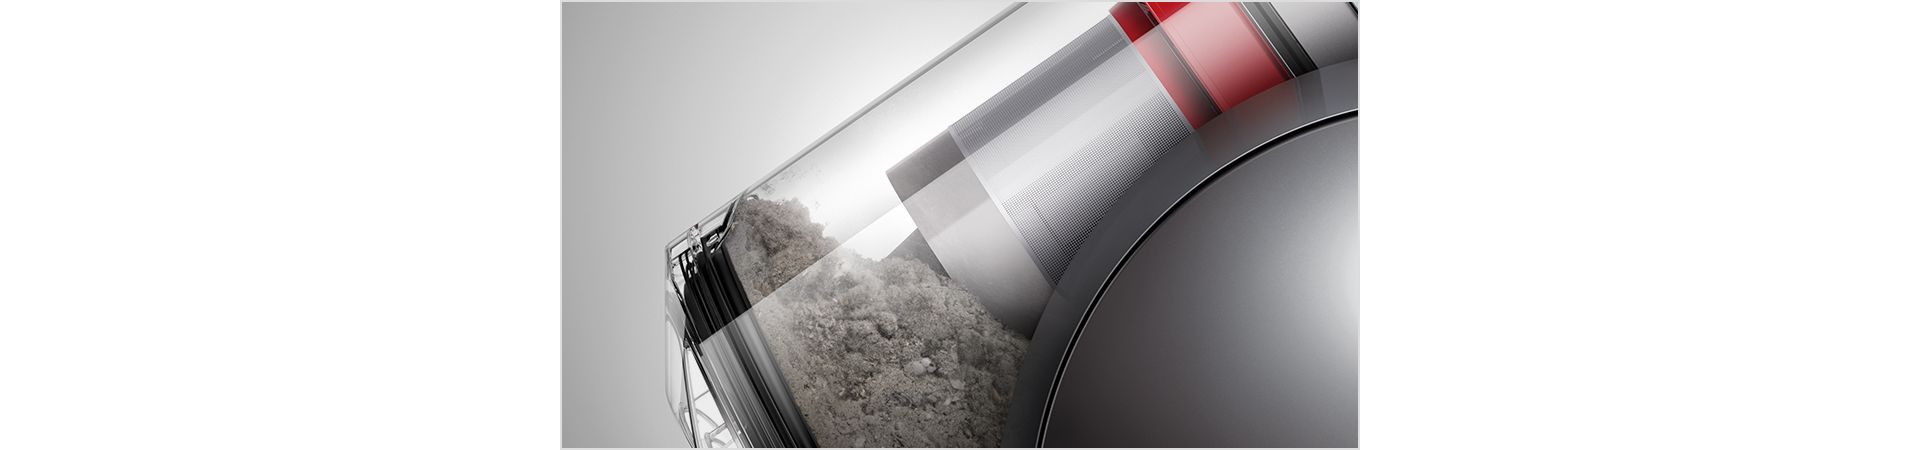 A close-up of the Dyson Cinetic Big Ball Animal Pro vacuum's transparent bin.